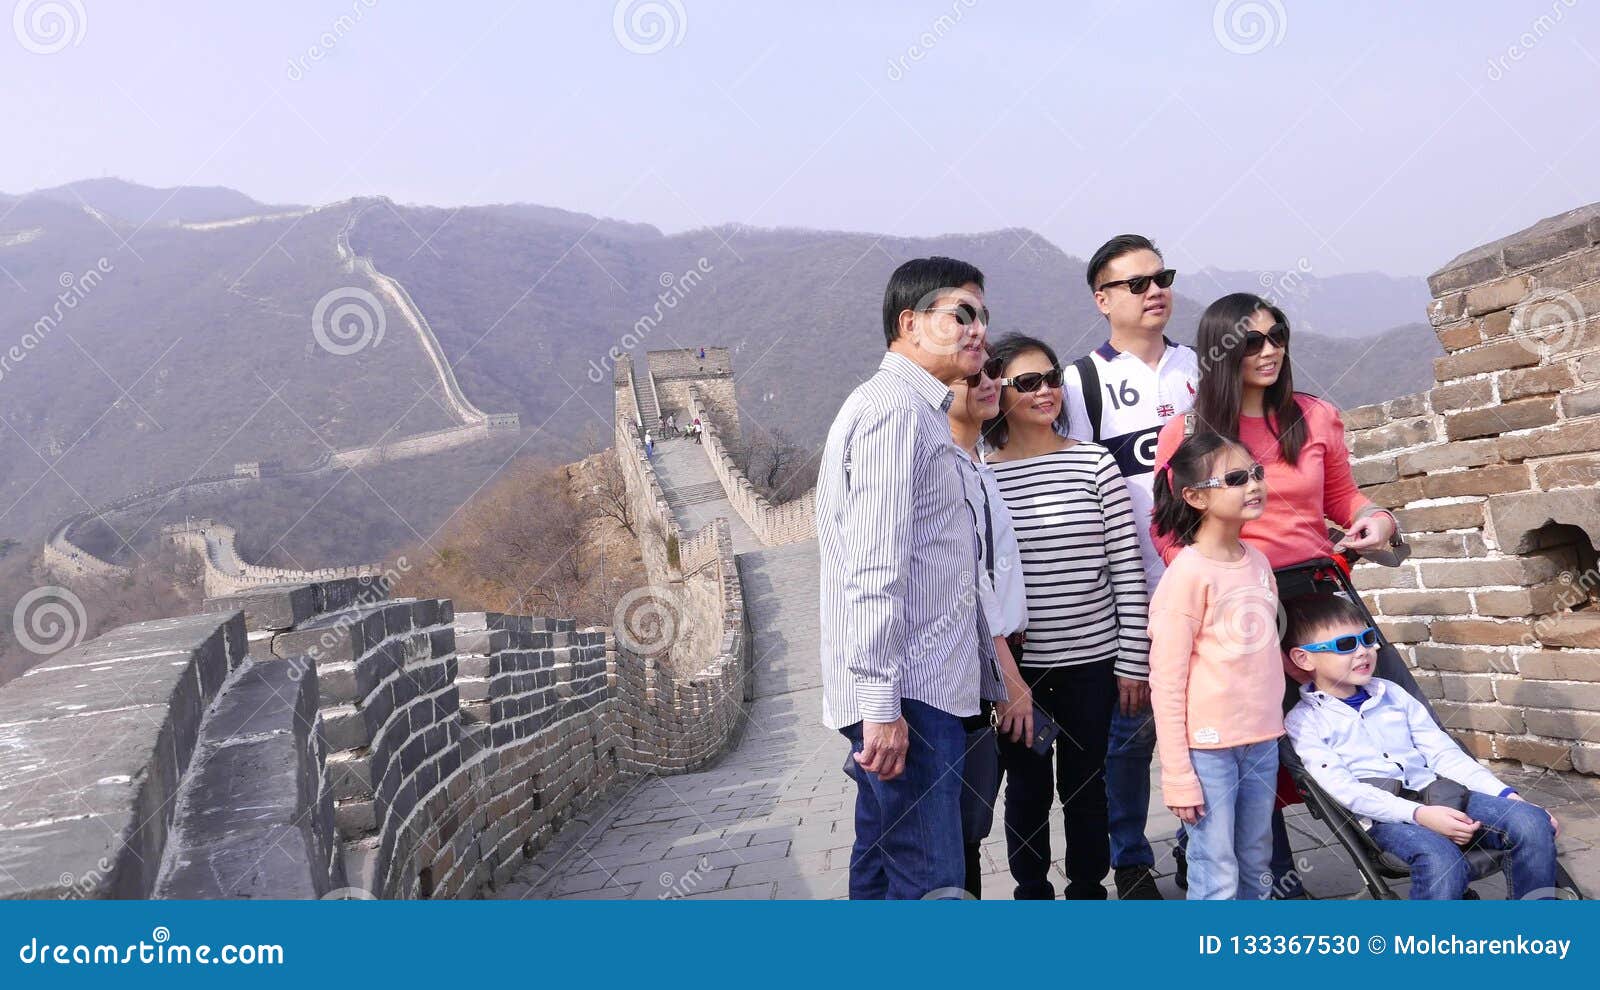 Thousands Tourists Visit Daily Chinese Wall Stock Photo 138458411